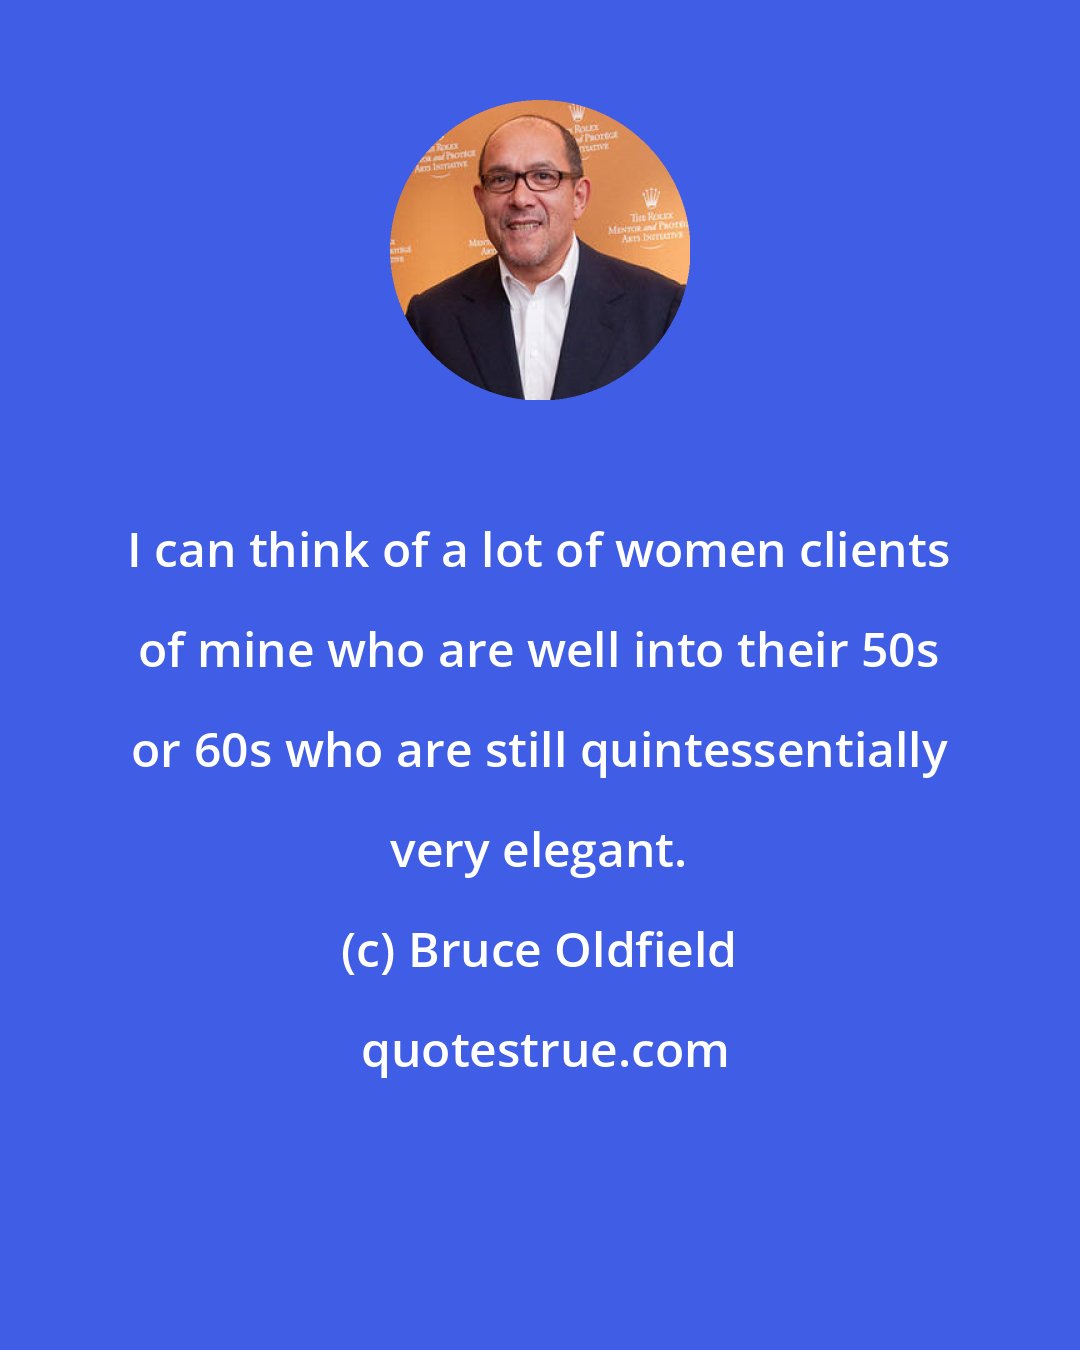 Bruce Oldfield: I can think of a lot of women clients of mine who are well into their 50s or 60s who are still quintessentially very elegant.